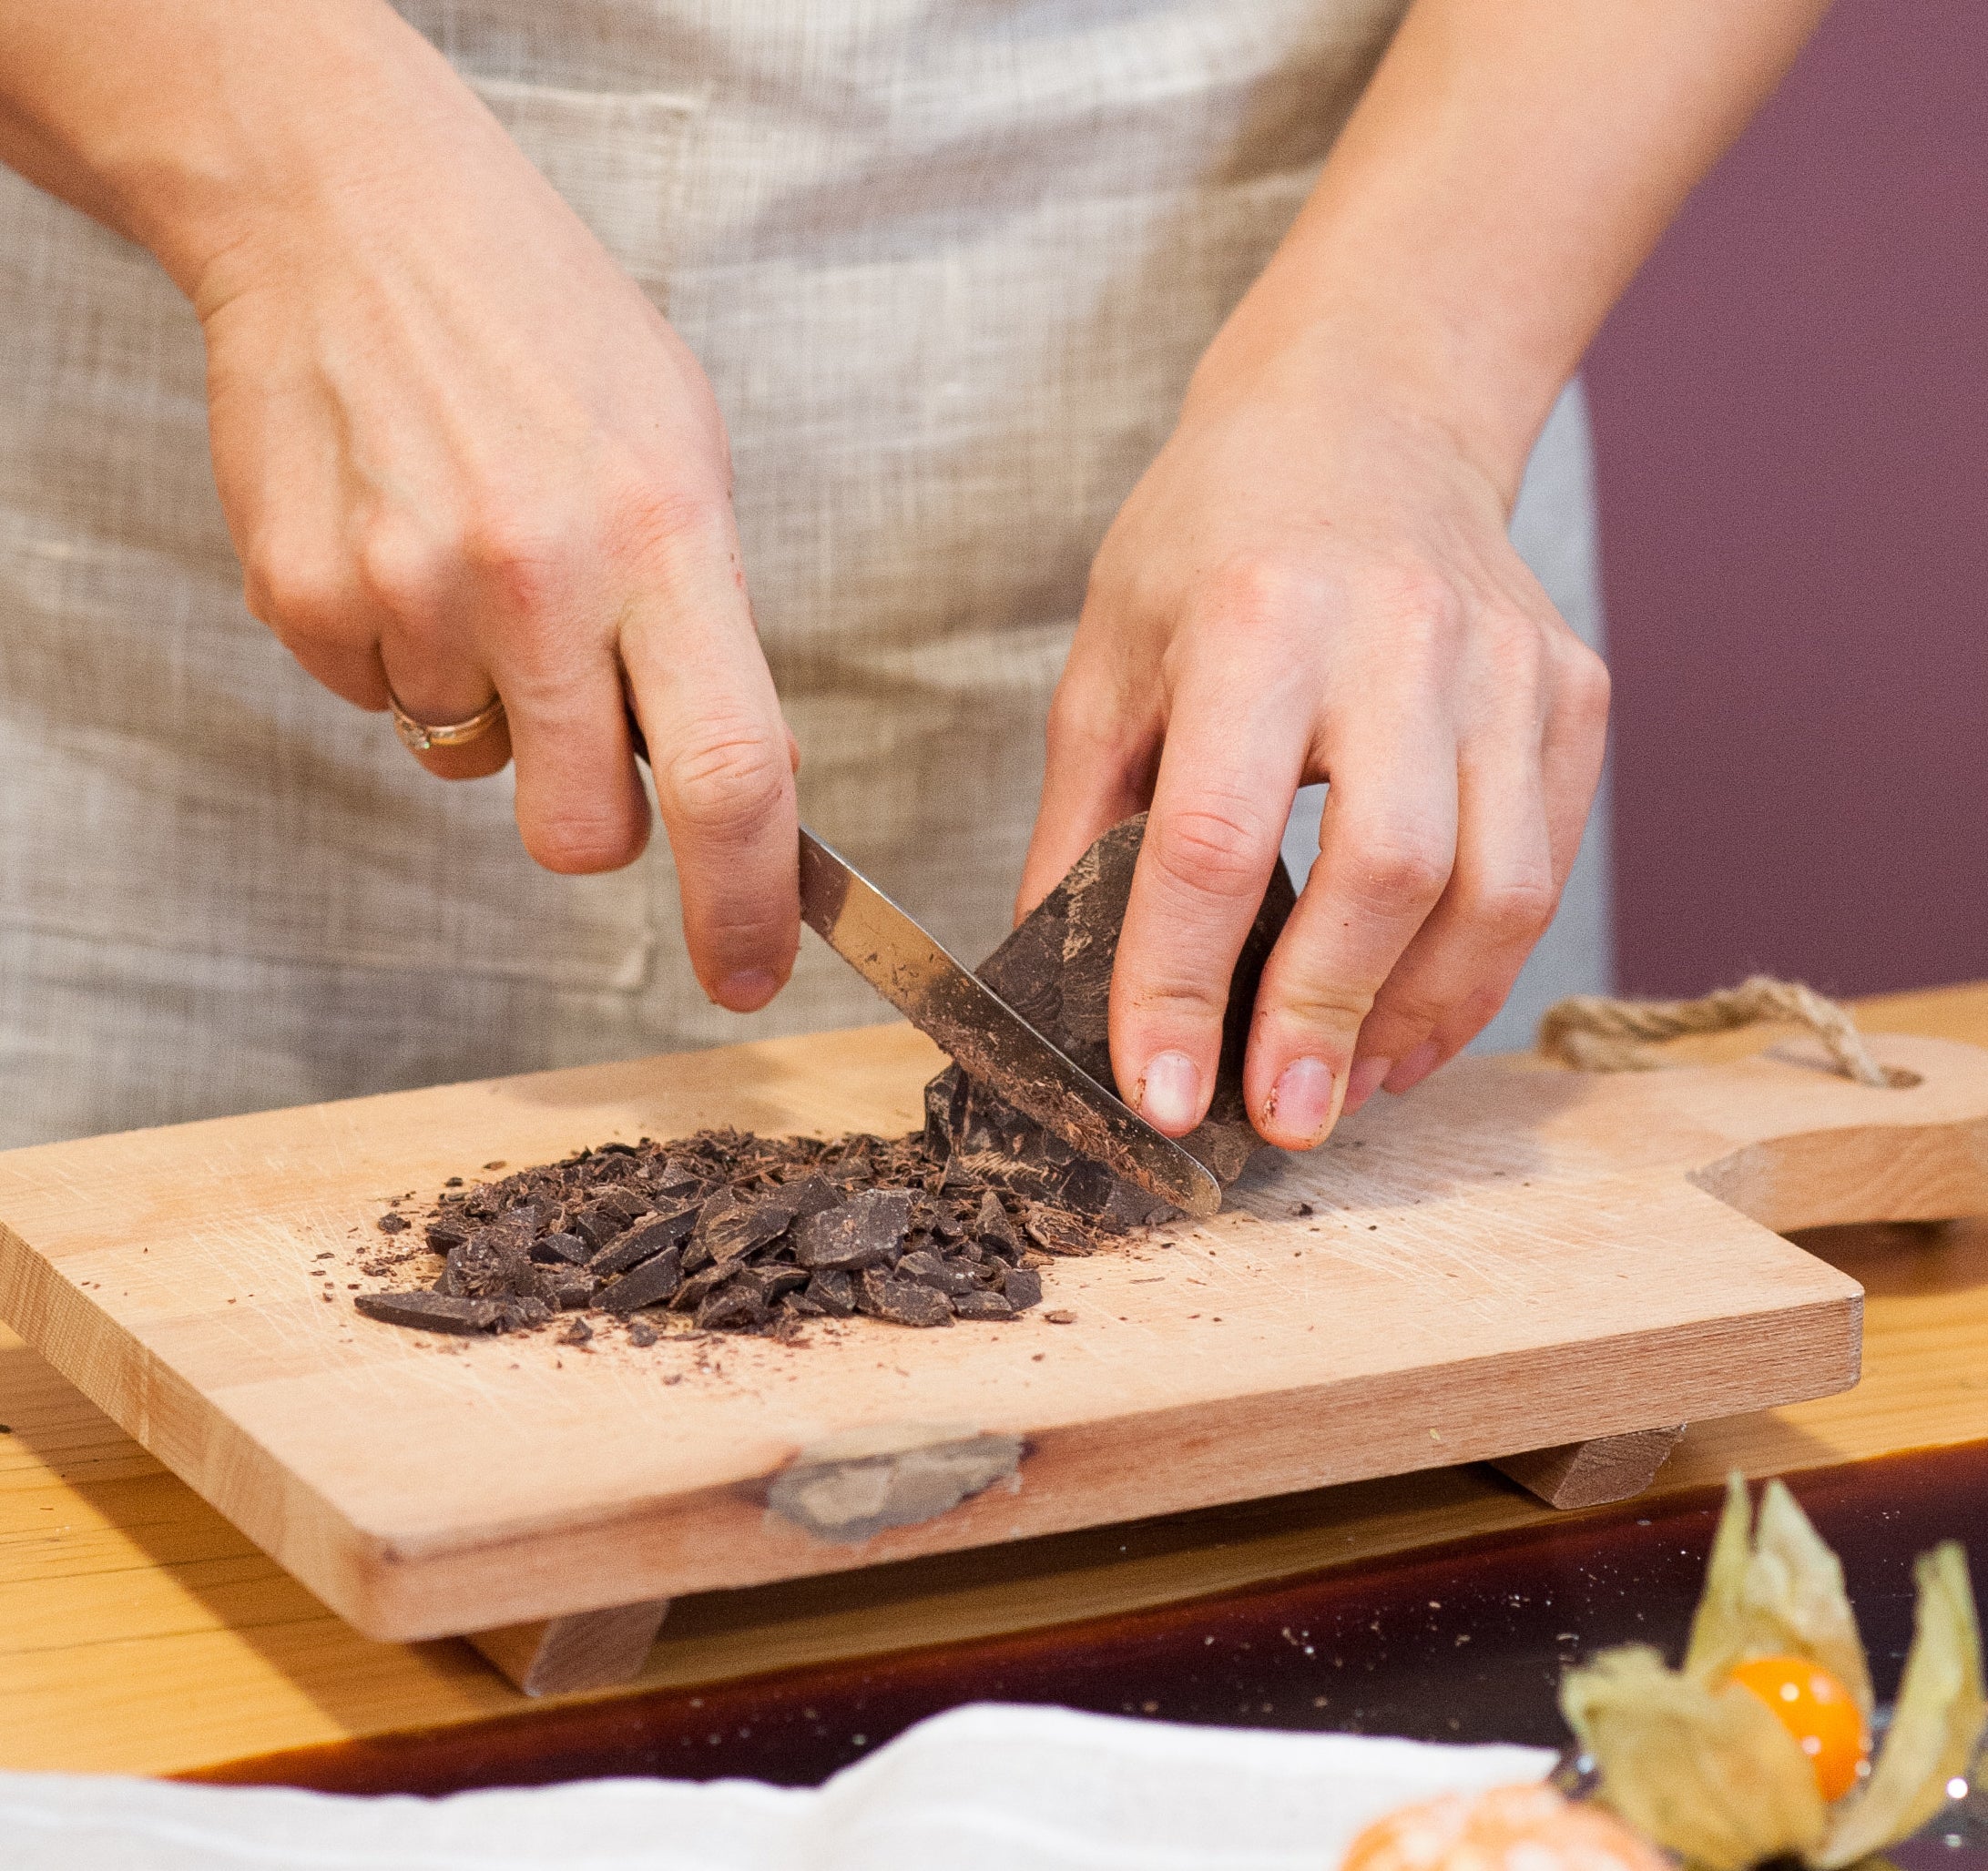 chopping chocolate into fine pieces on a wooden cutting board